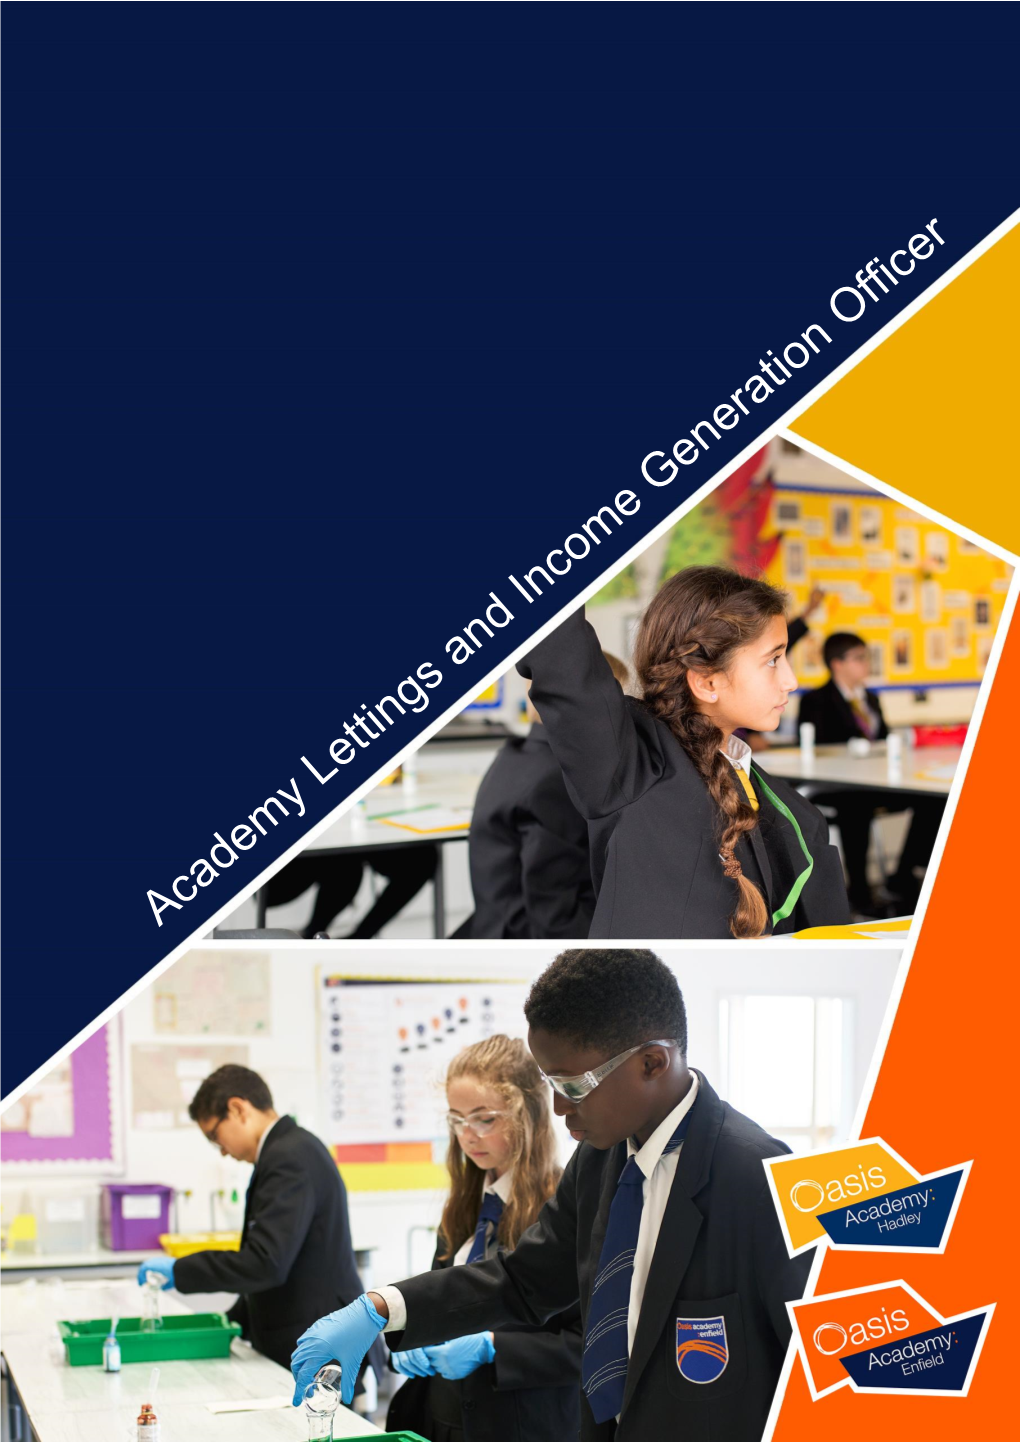 Lettings and Income Generation Officer at Oasis Academy Enfield and Oasis Academy Hadley